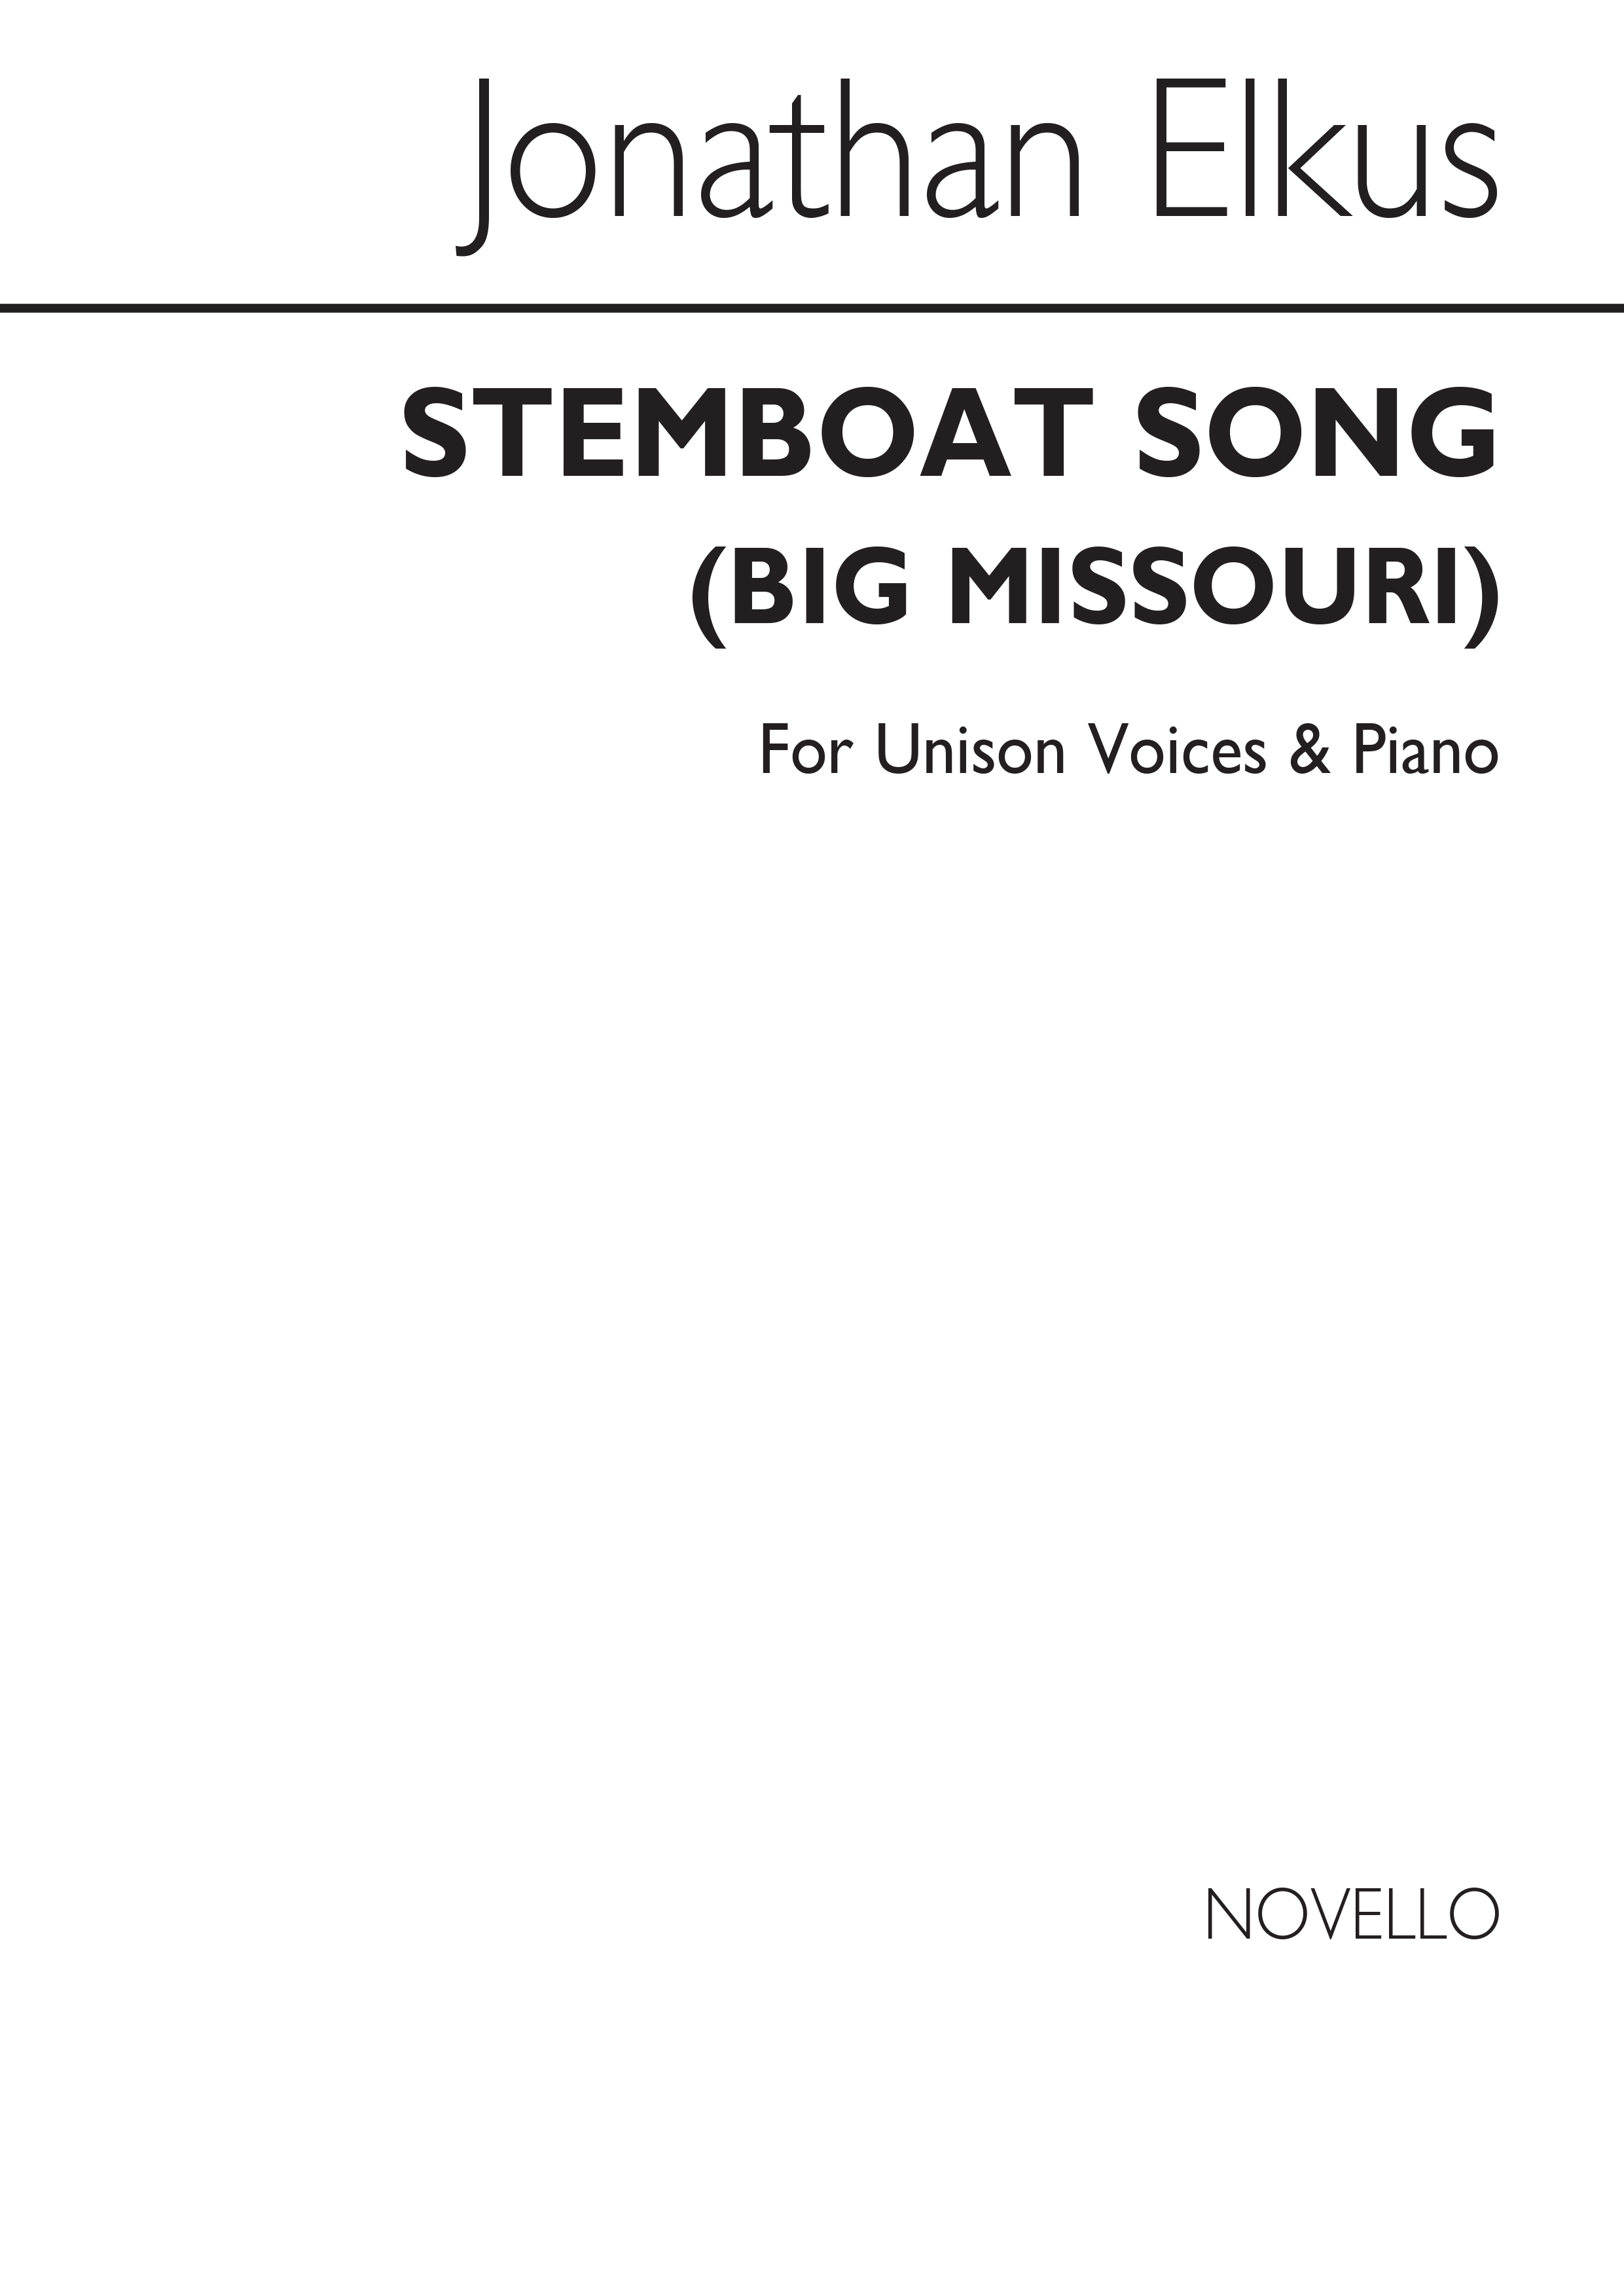 Elkus: Steamboat Song from 'Big Missouri' For Unison Voices and Piano